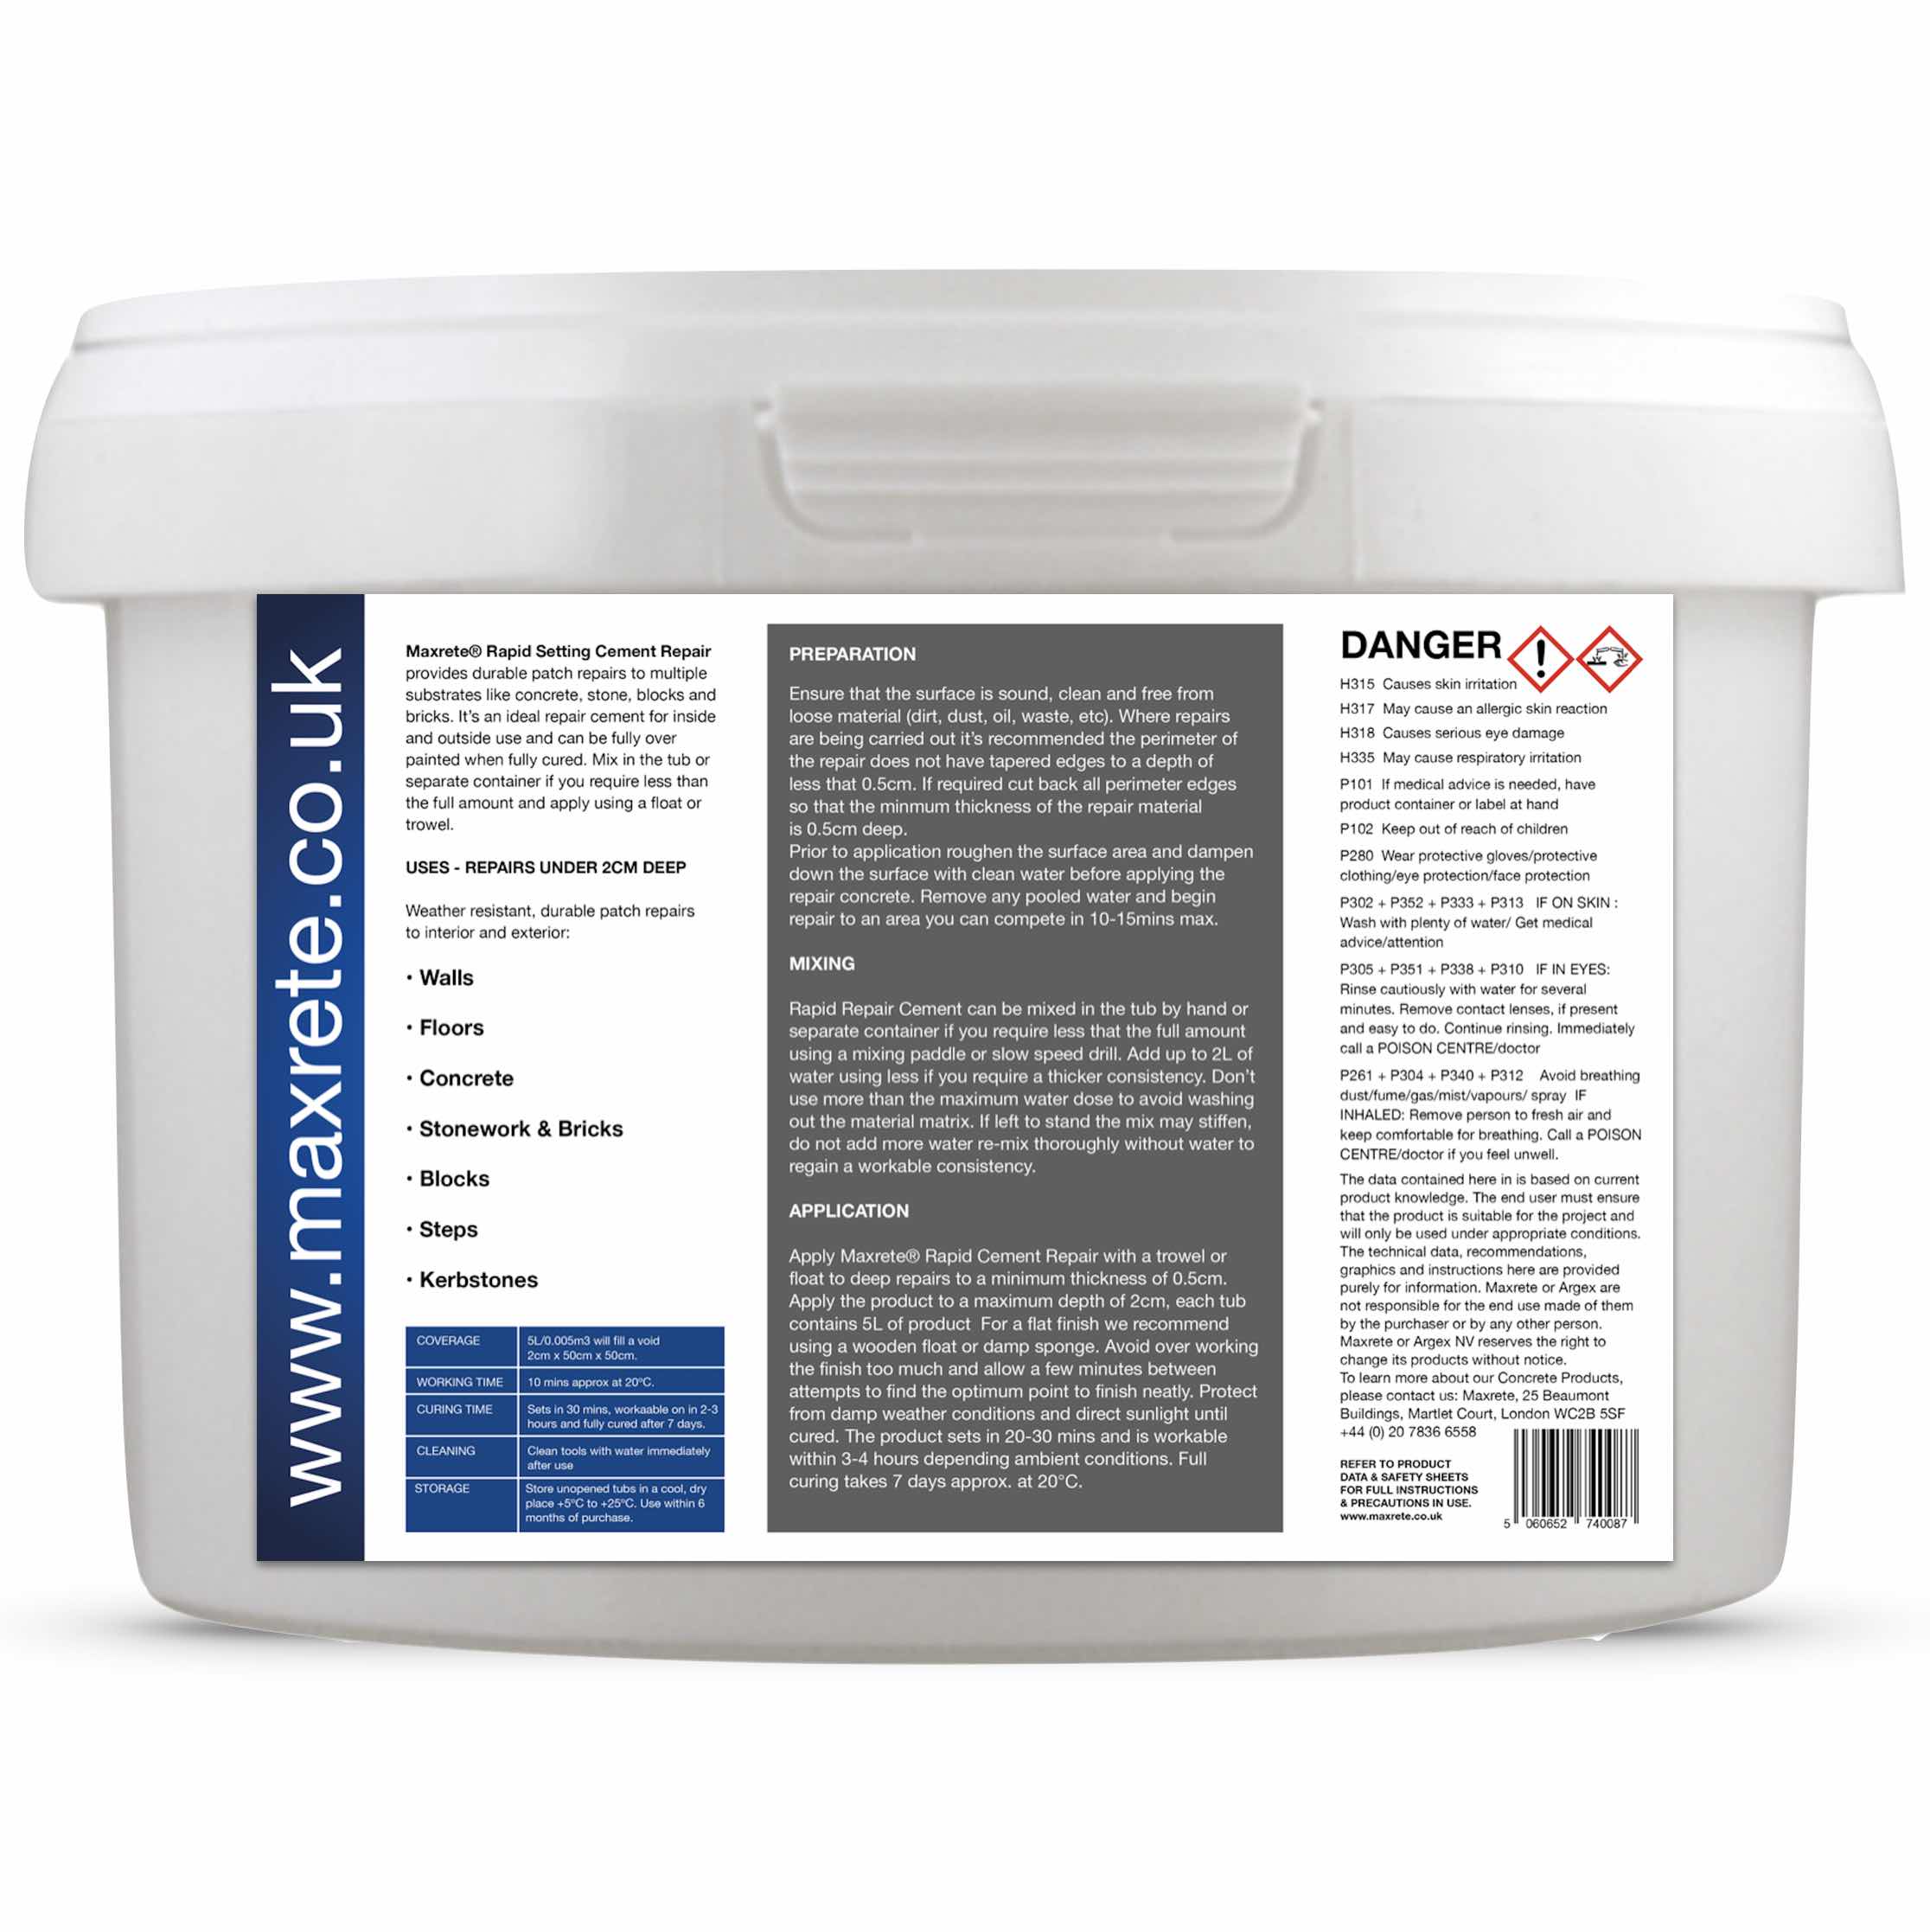 Rapid Setting Cement 'Mix in Tub' Incl Multi-Use Kit